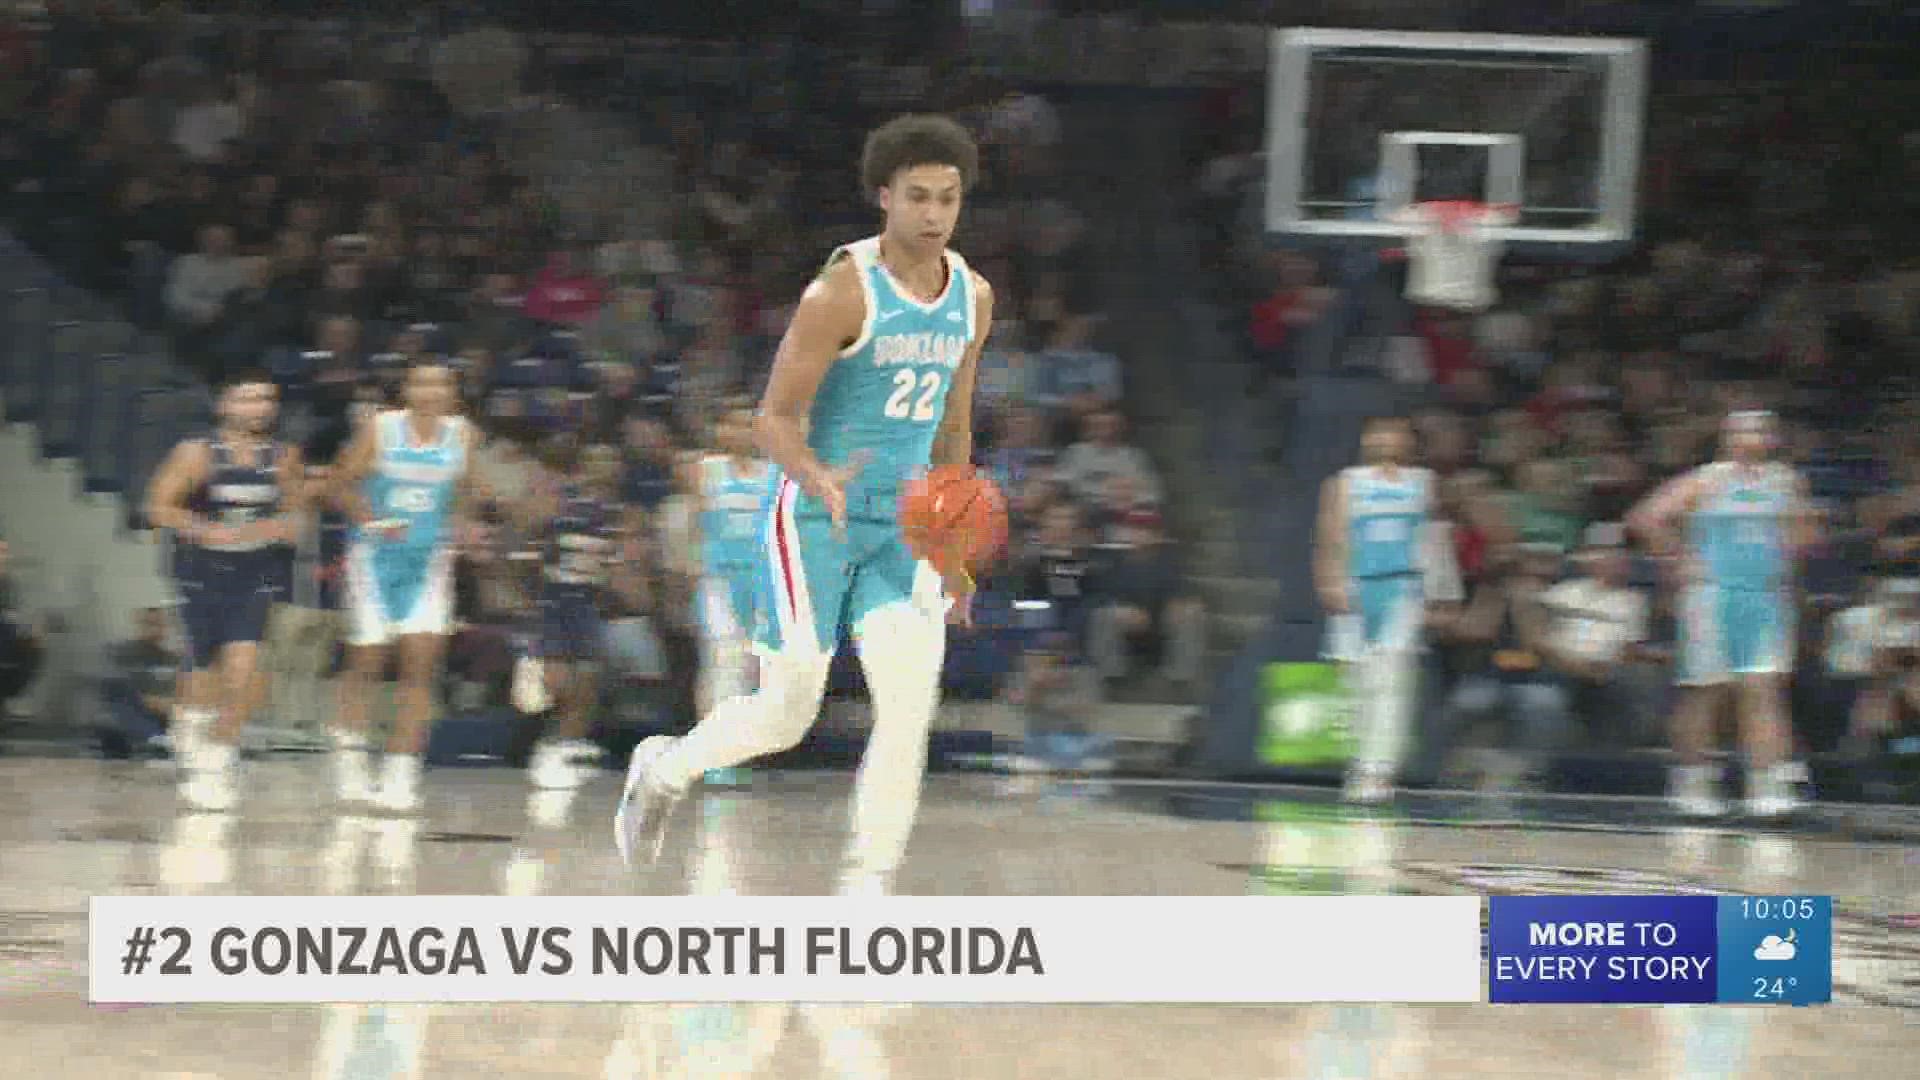 Drew Timme scored 22 points, Julian Strawther added 16, and No. 2 Gonzaga used a big first half run to beat North Florida 104-63 in the season opener Monday.